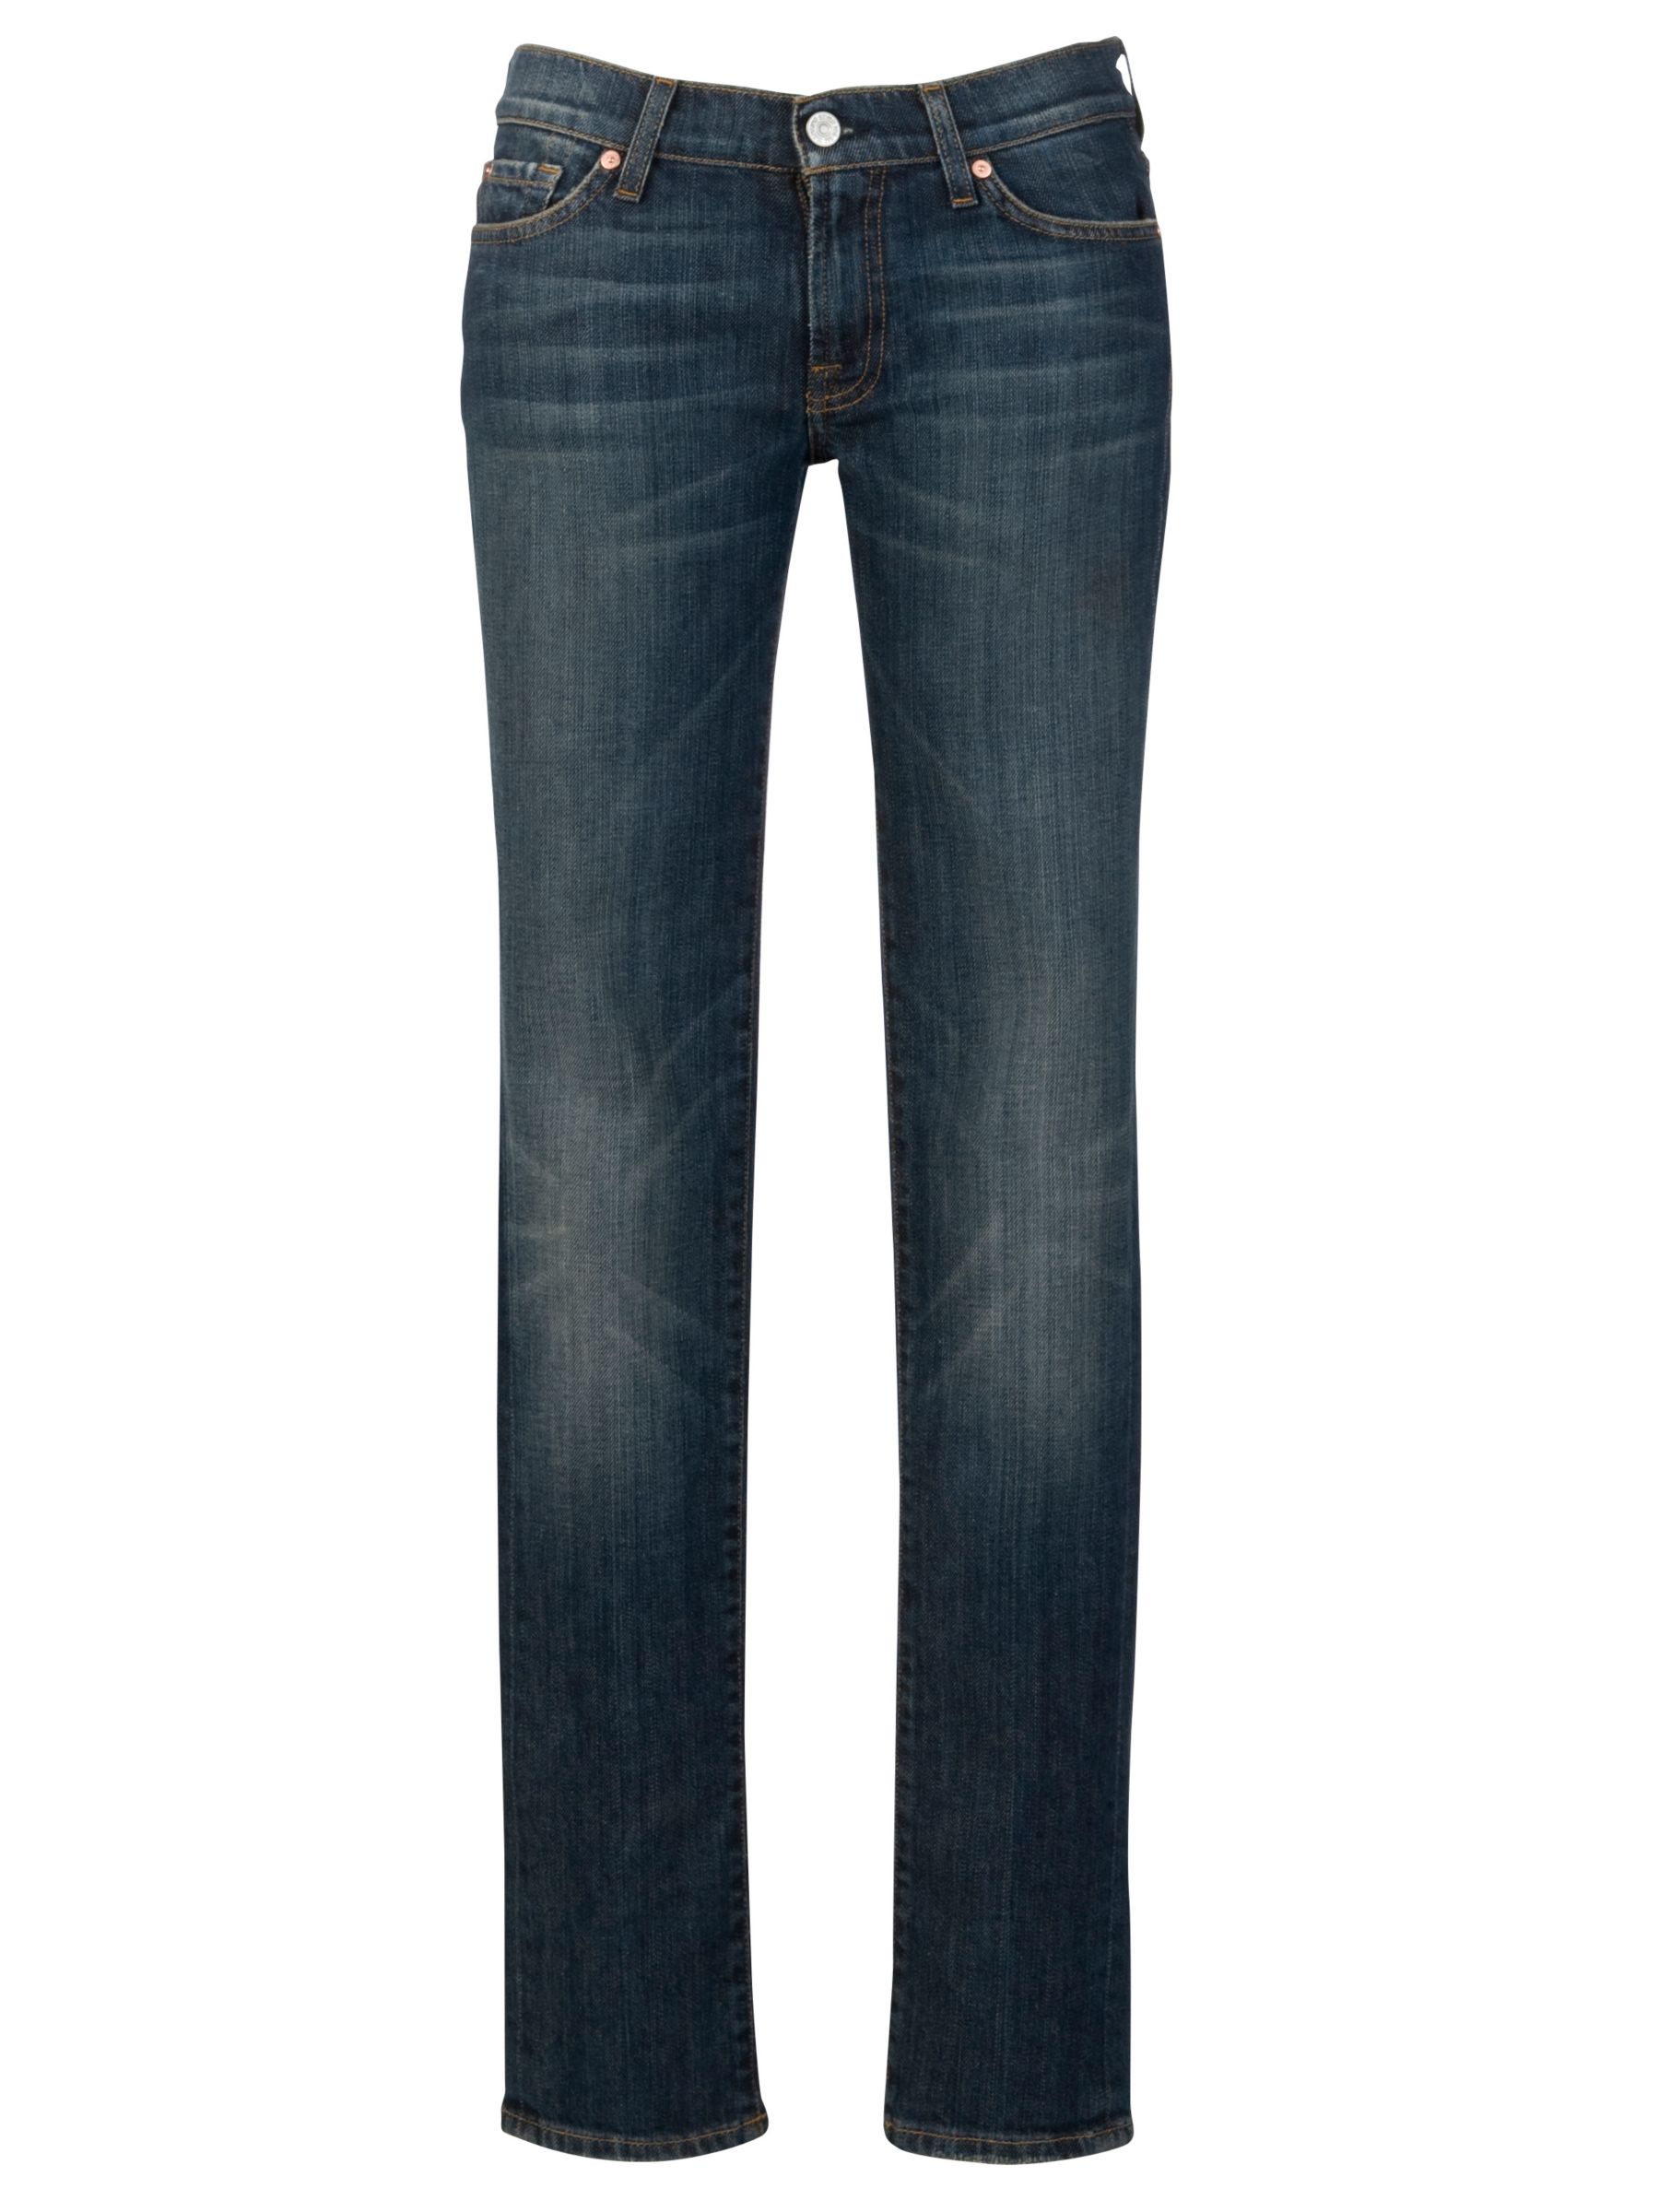 7 For All Mankind Roxanne Skinny Jeans